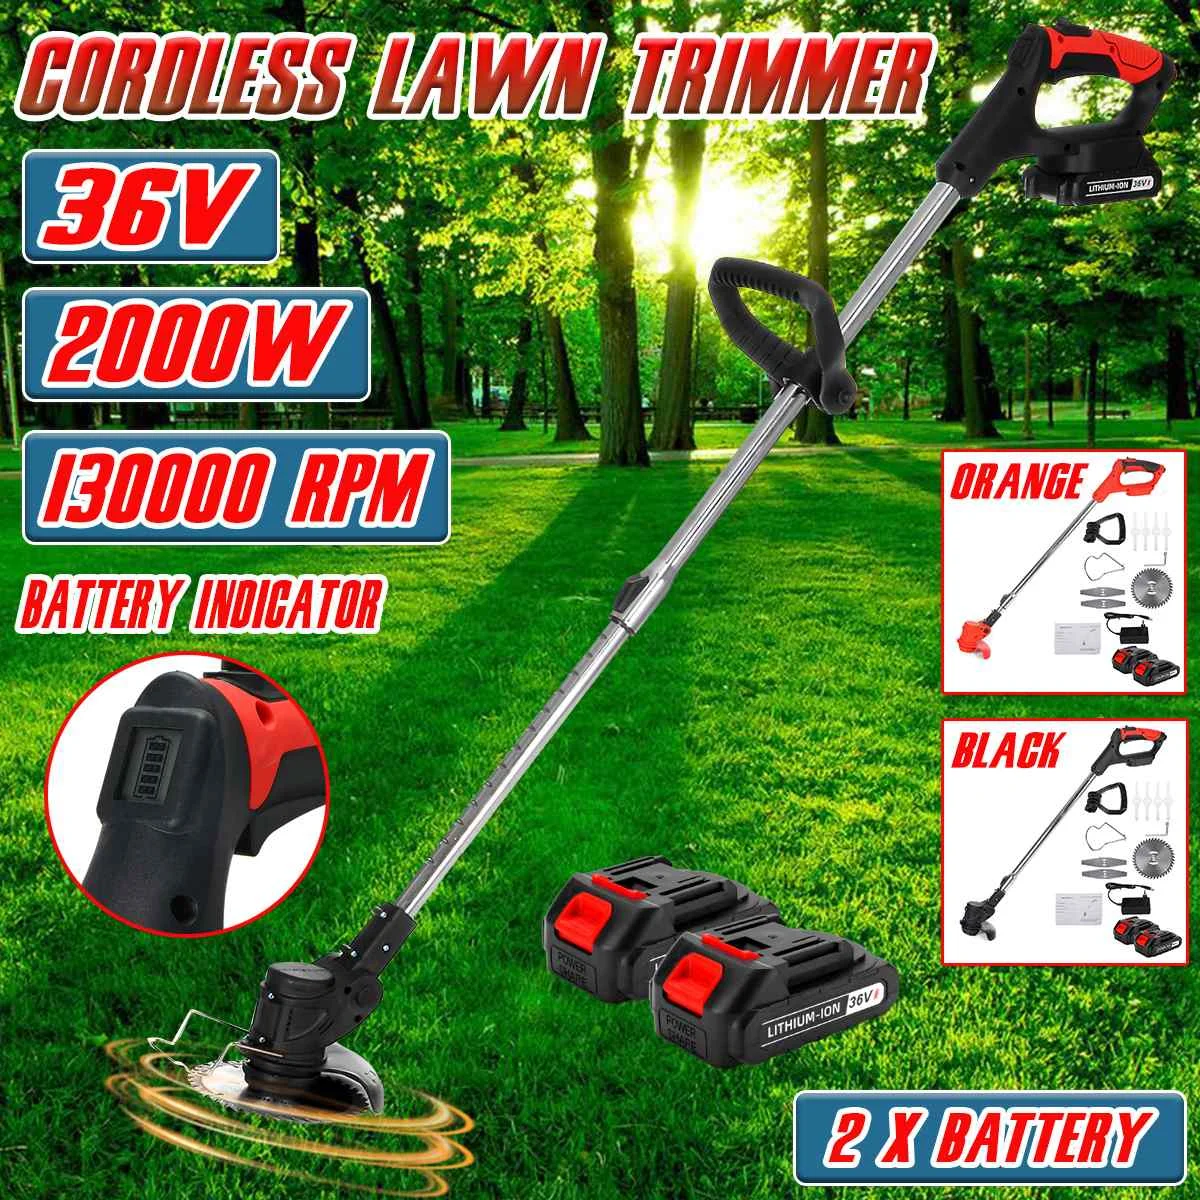 36V 2000W Electric Lawn Mower 130000RPM Cordless Grass Trimmer Adjustable 3 IN 1 Cutter Digital Display For Makita 18V Battery